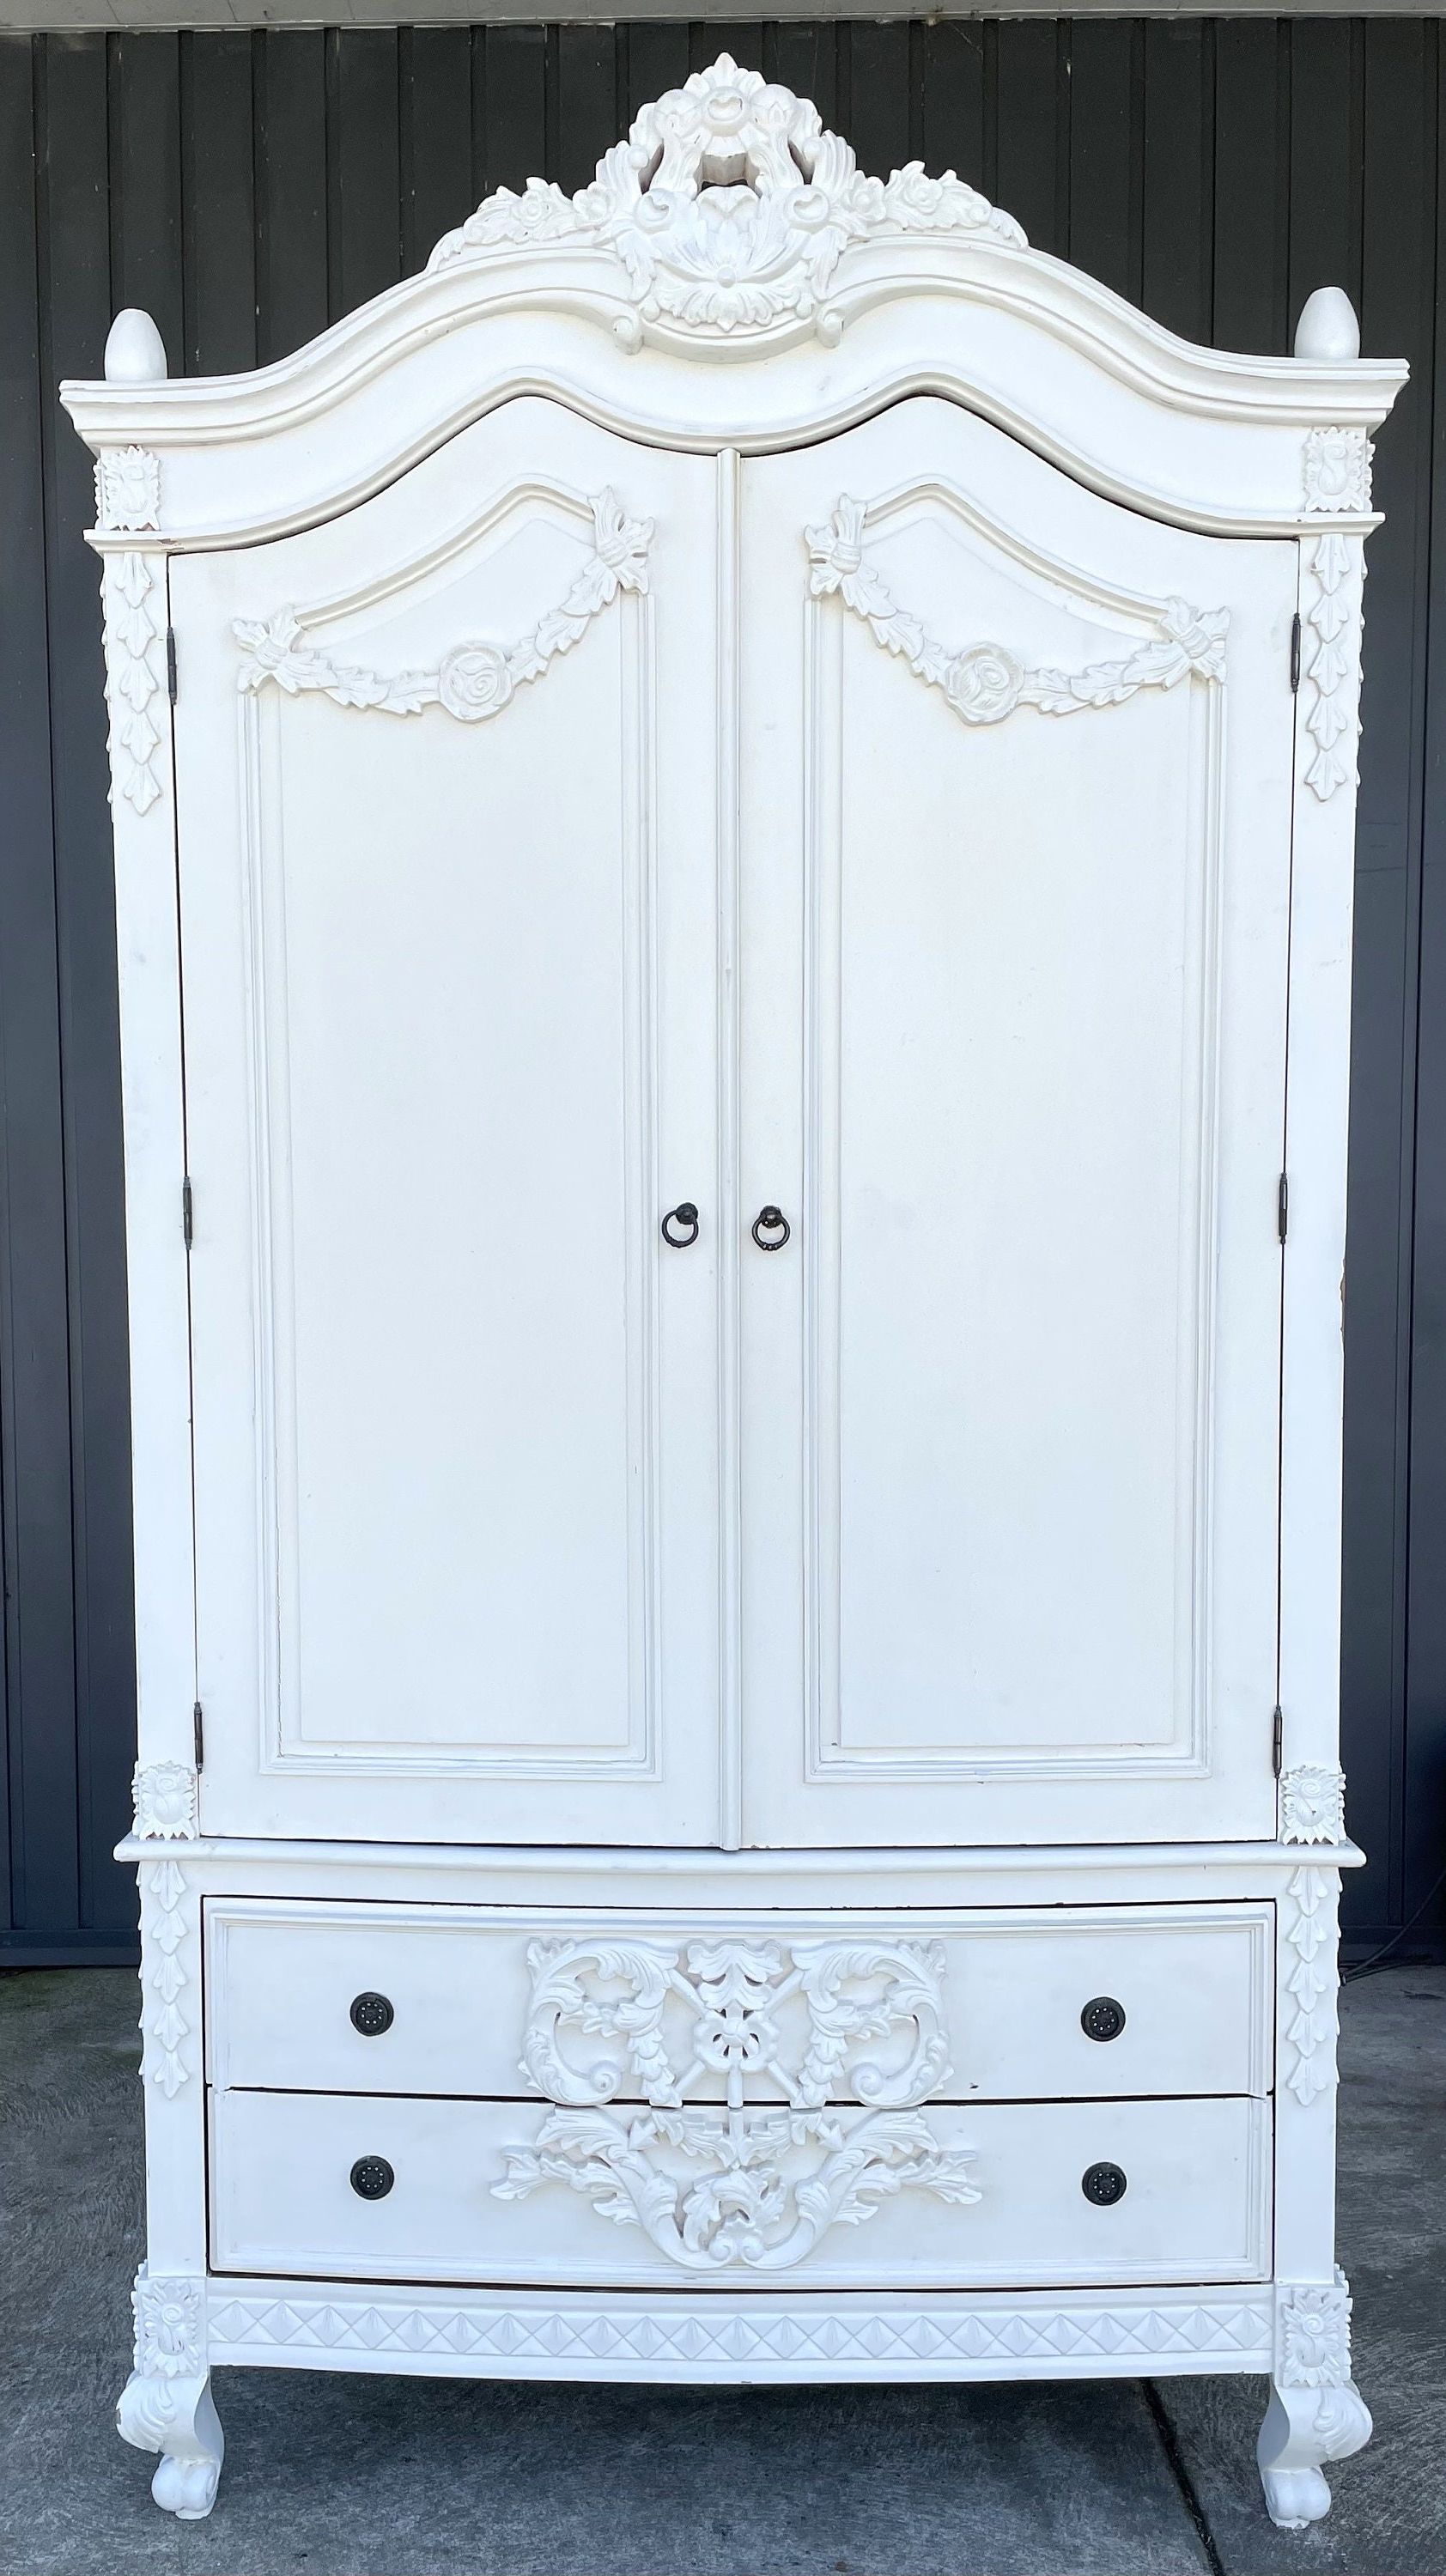 Shabby Chic Distressed White Vintage Style French Baroque – Etsy With Cheap Shabby Chic Wardrobes (View 14 of 20)